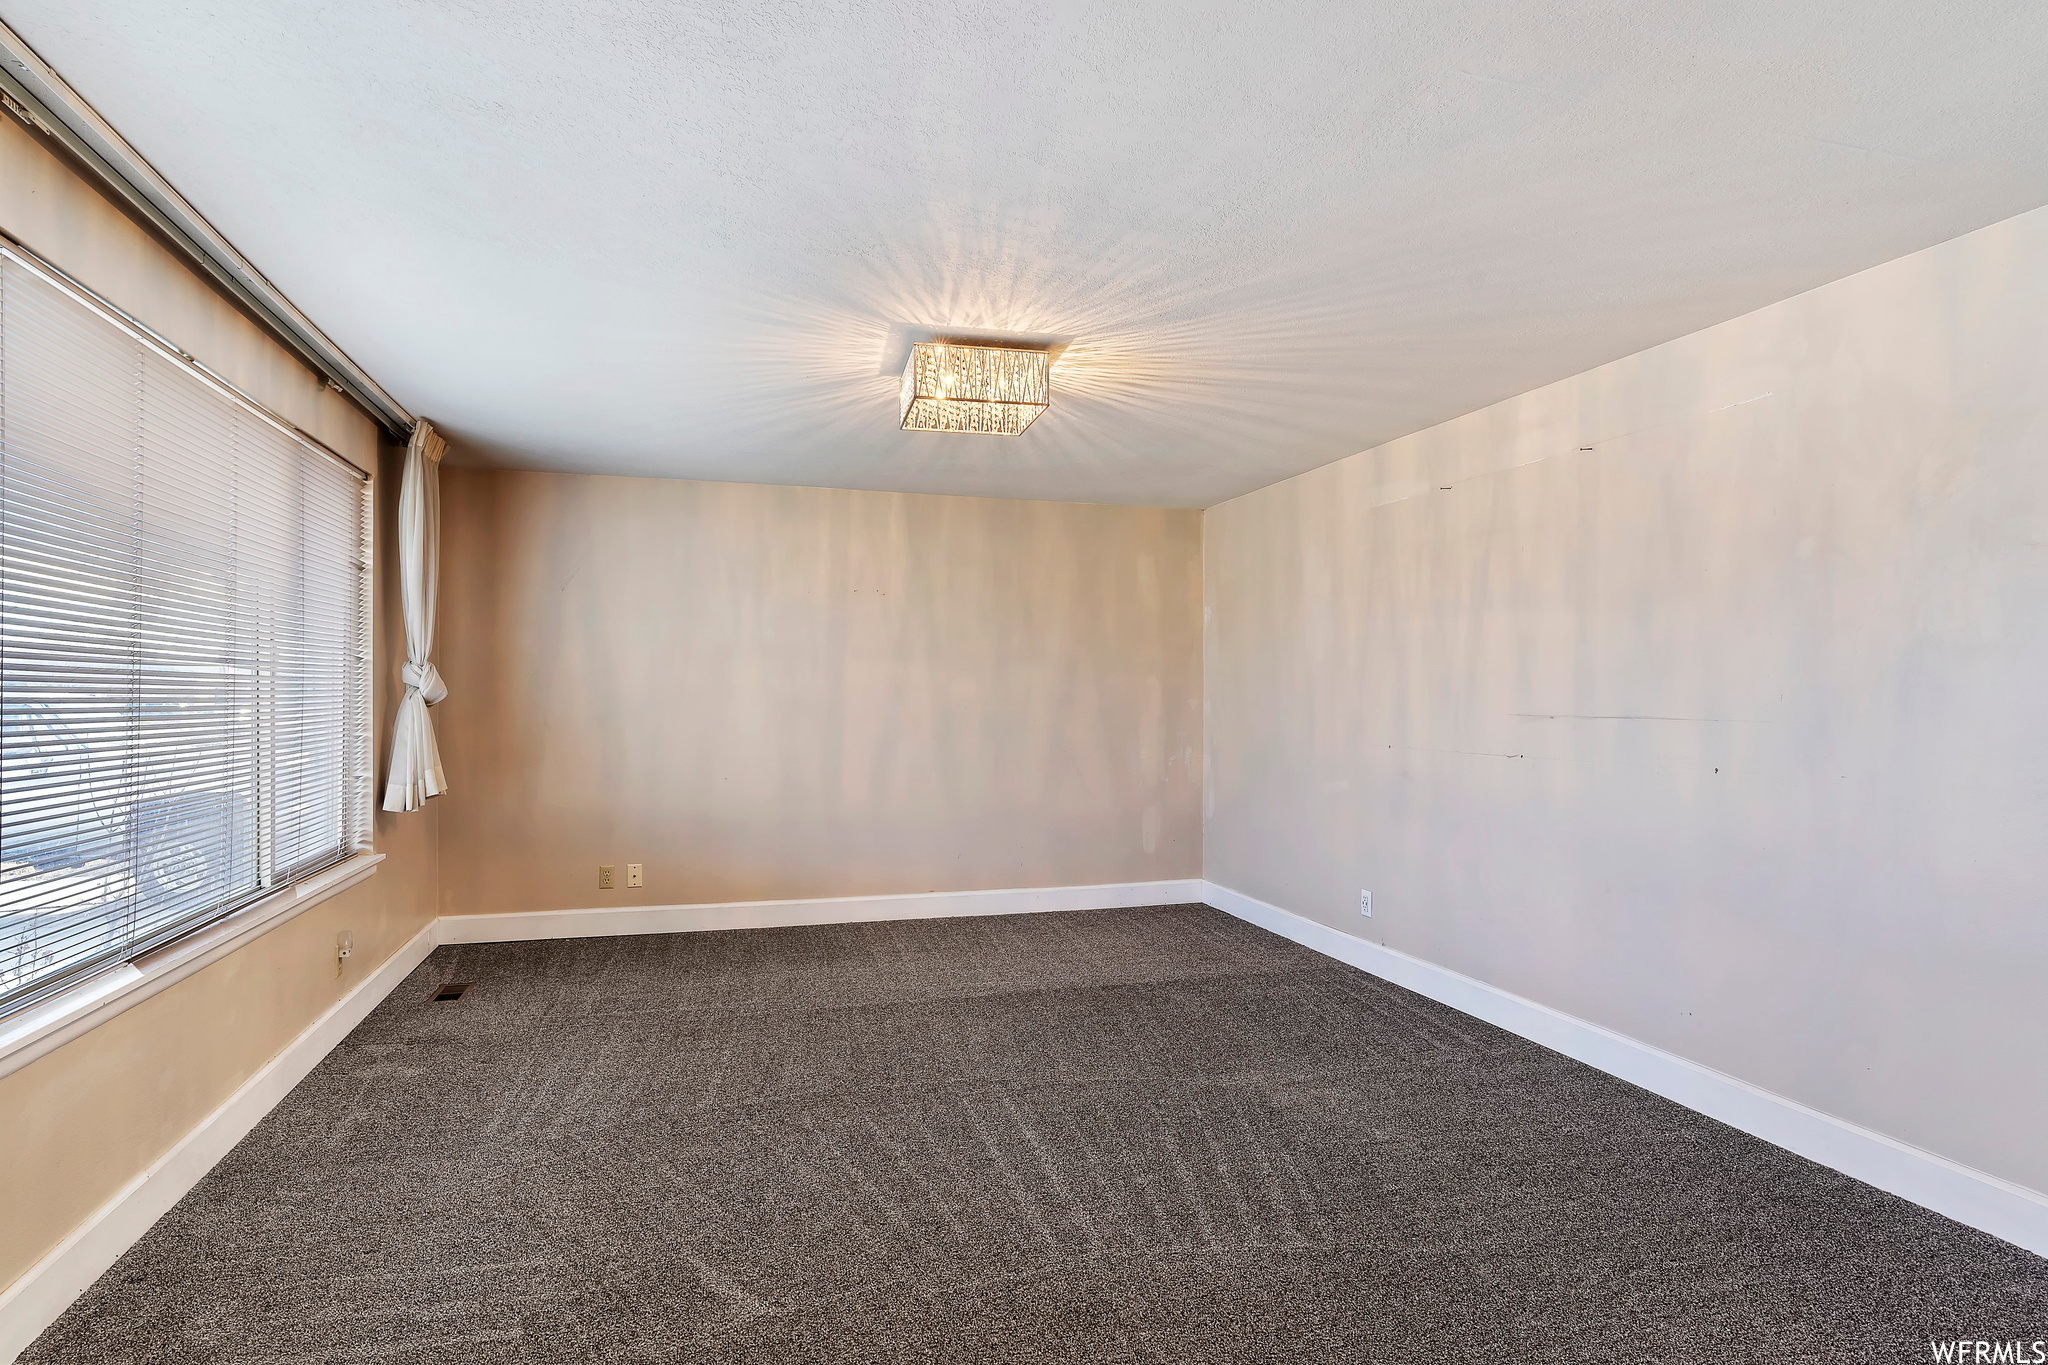 View of carpeted formal living room